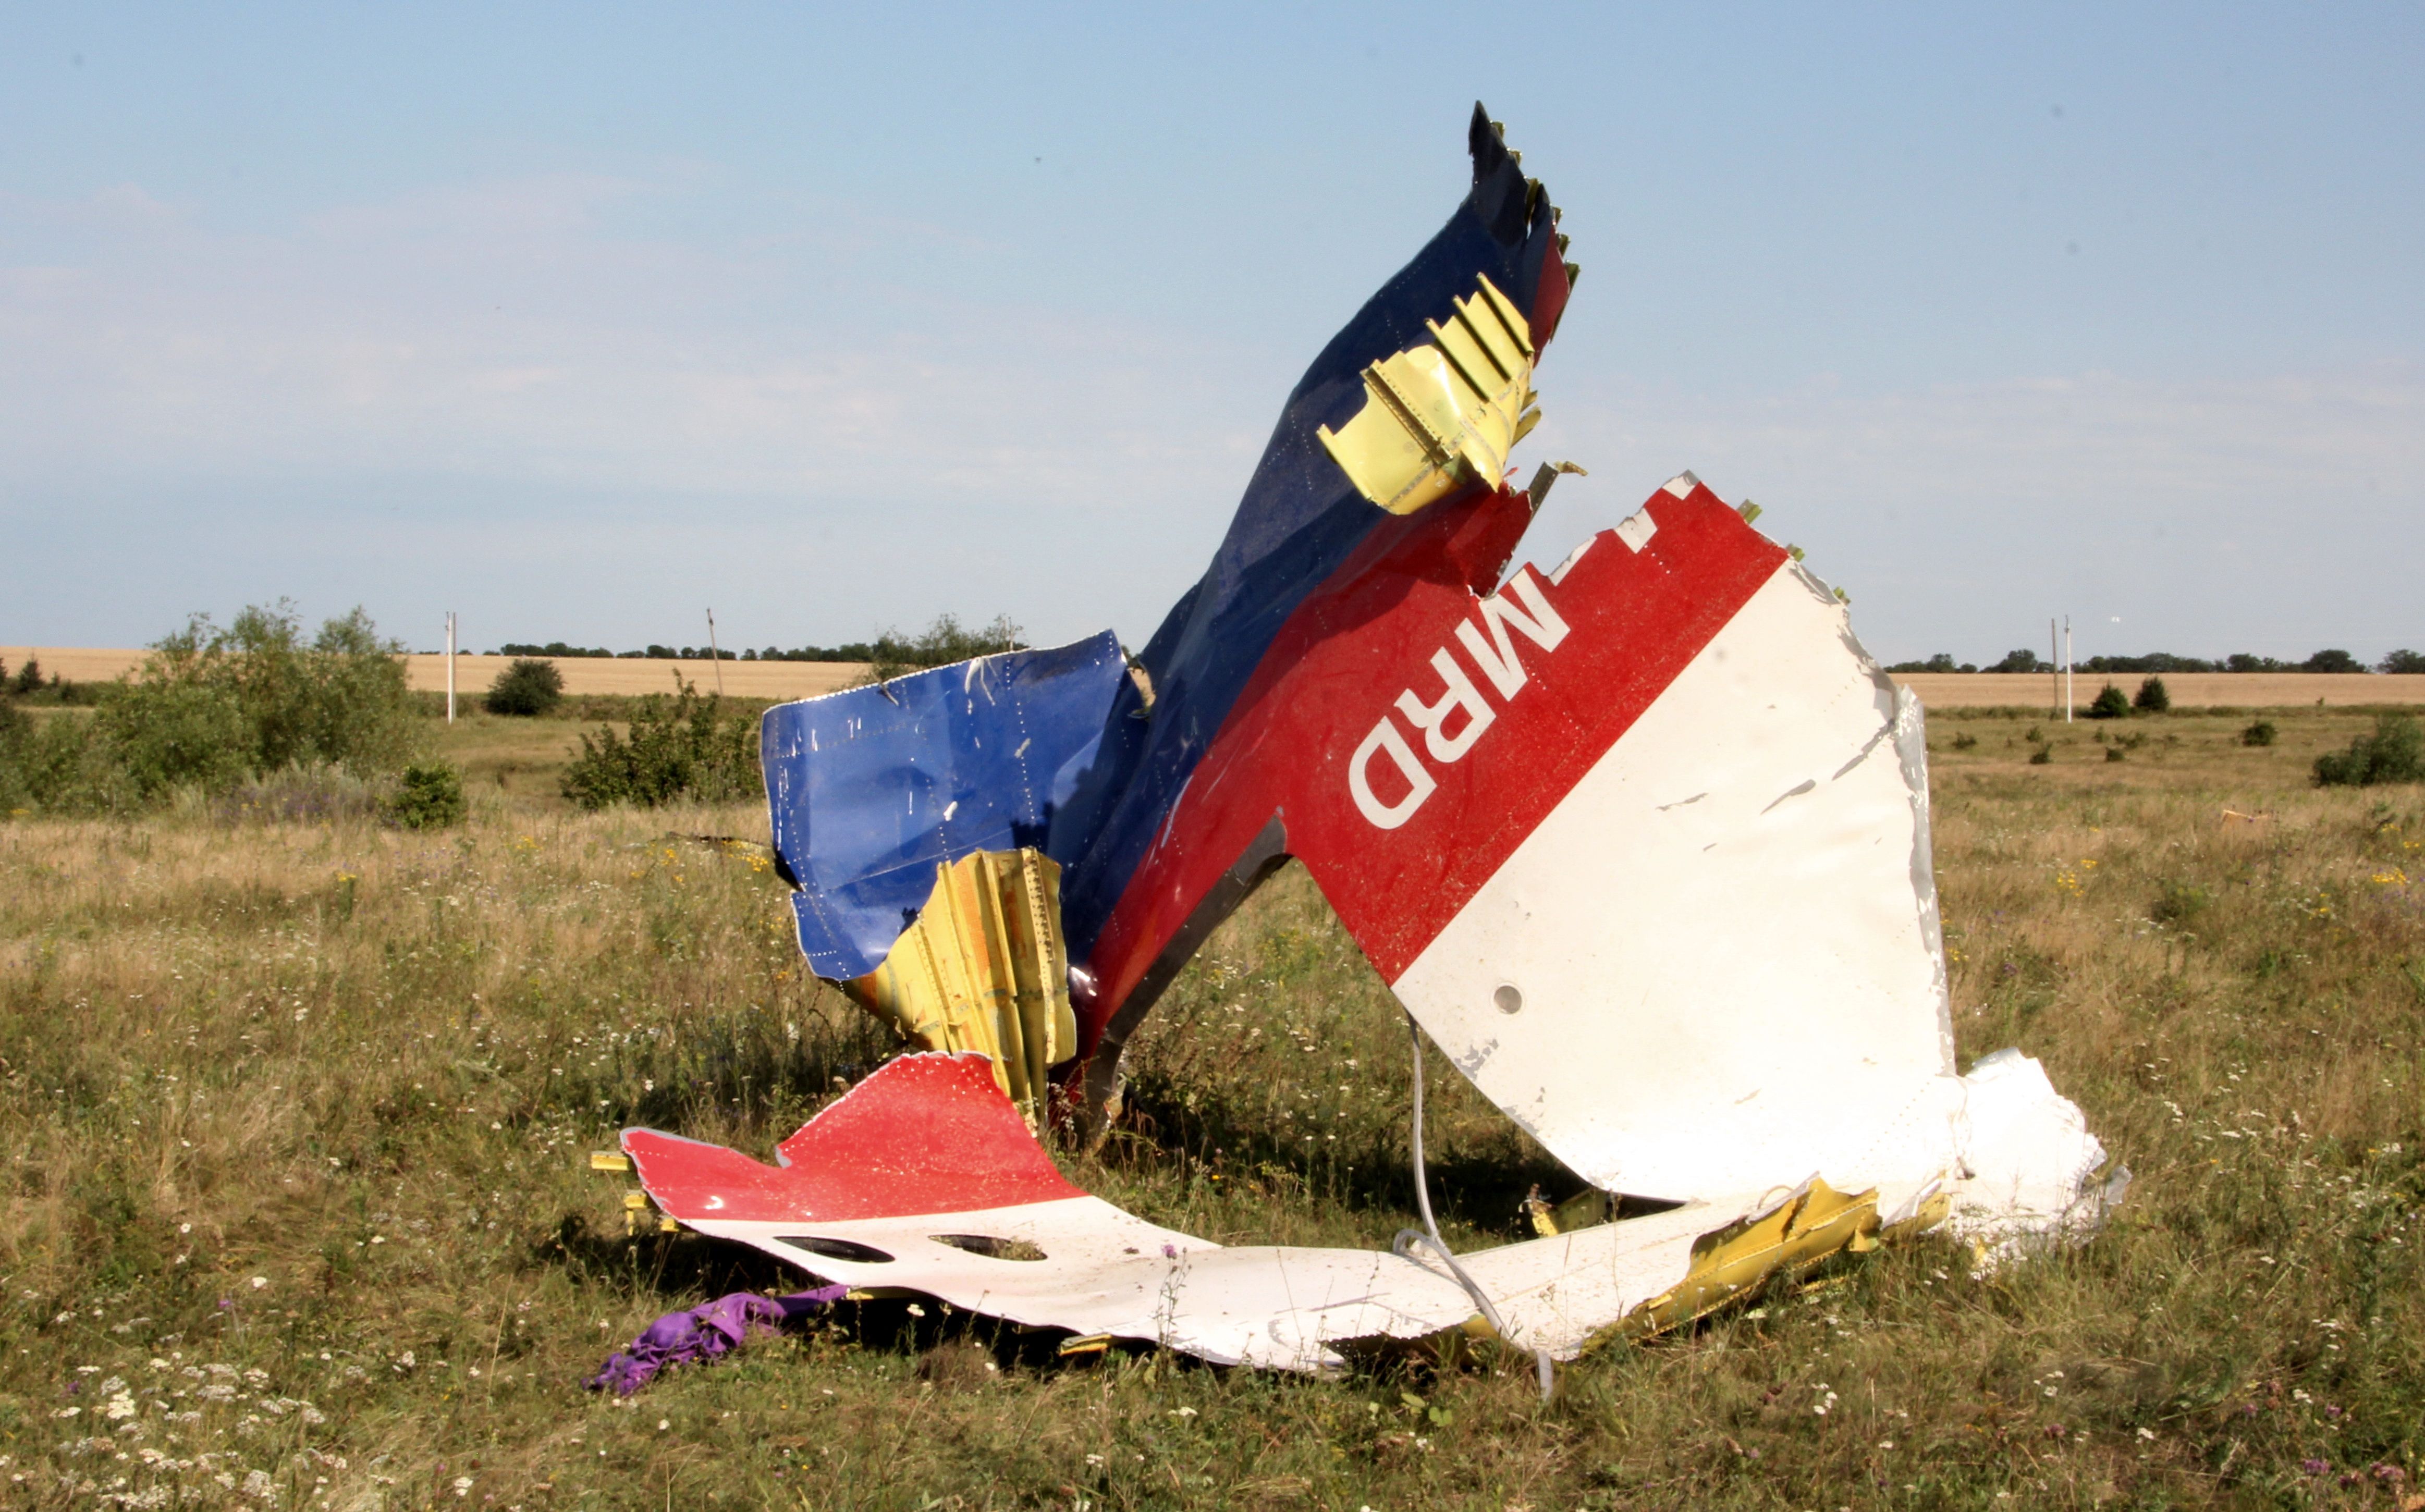 Crash site on July 17, 2014 of the Boeing-777 of Malaysia airlines, flight MH17 near Hrabovo village